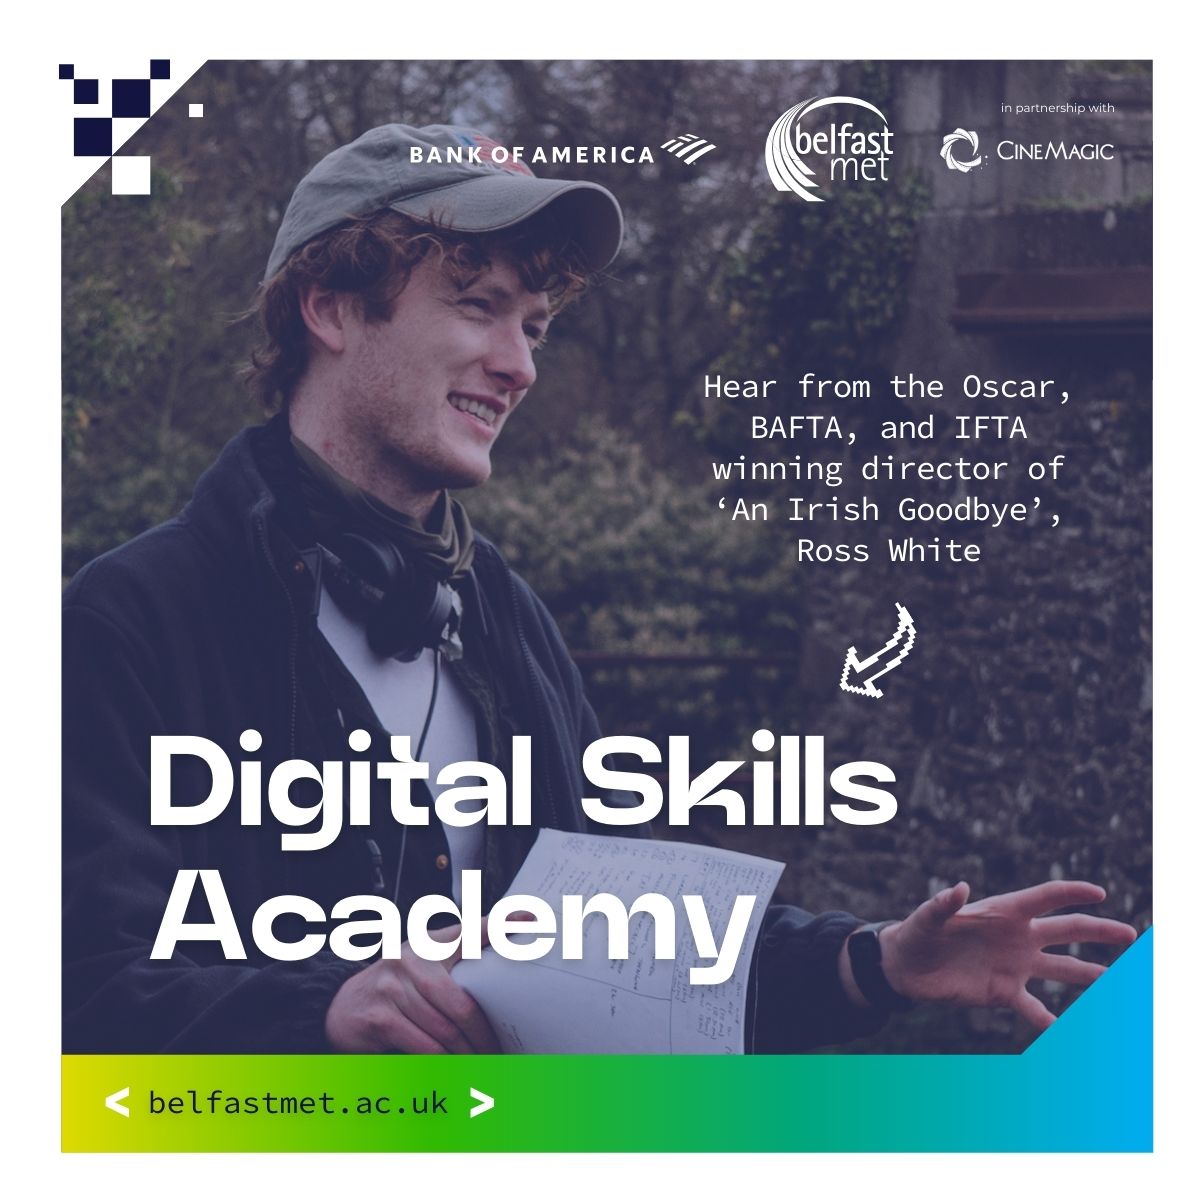 Sign up for @bfastmet’s #DigitalSkillsAcademy + hear from Ross White! Work towards an OCN NI Level 3 award while receiving a weekly training allowance of up to £120*.

🔗tinyurl.com/2svwpsj4

Supported by @bankofamerica in partnership with Cinemagic

#CreativeCareers